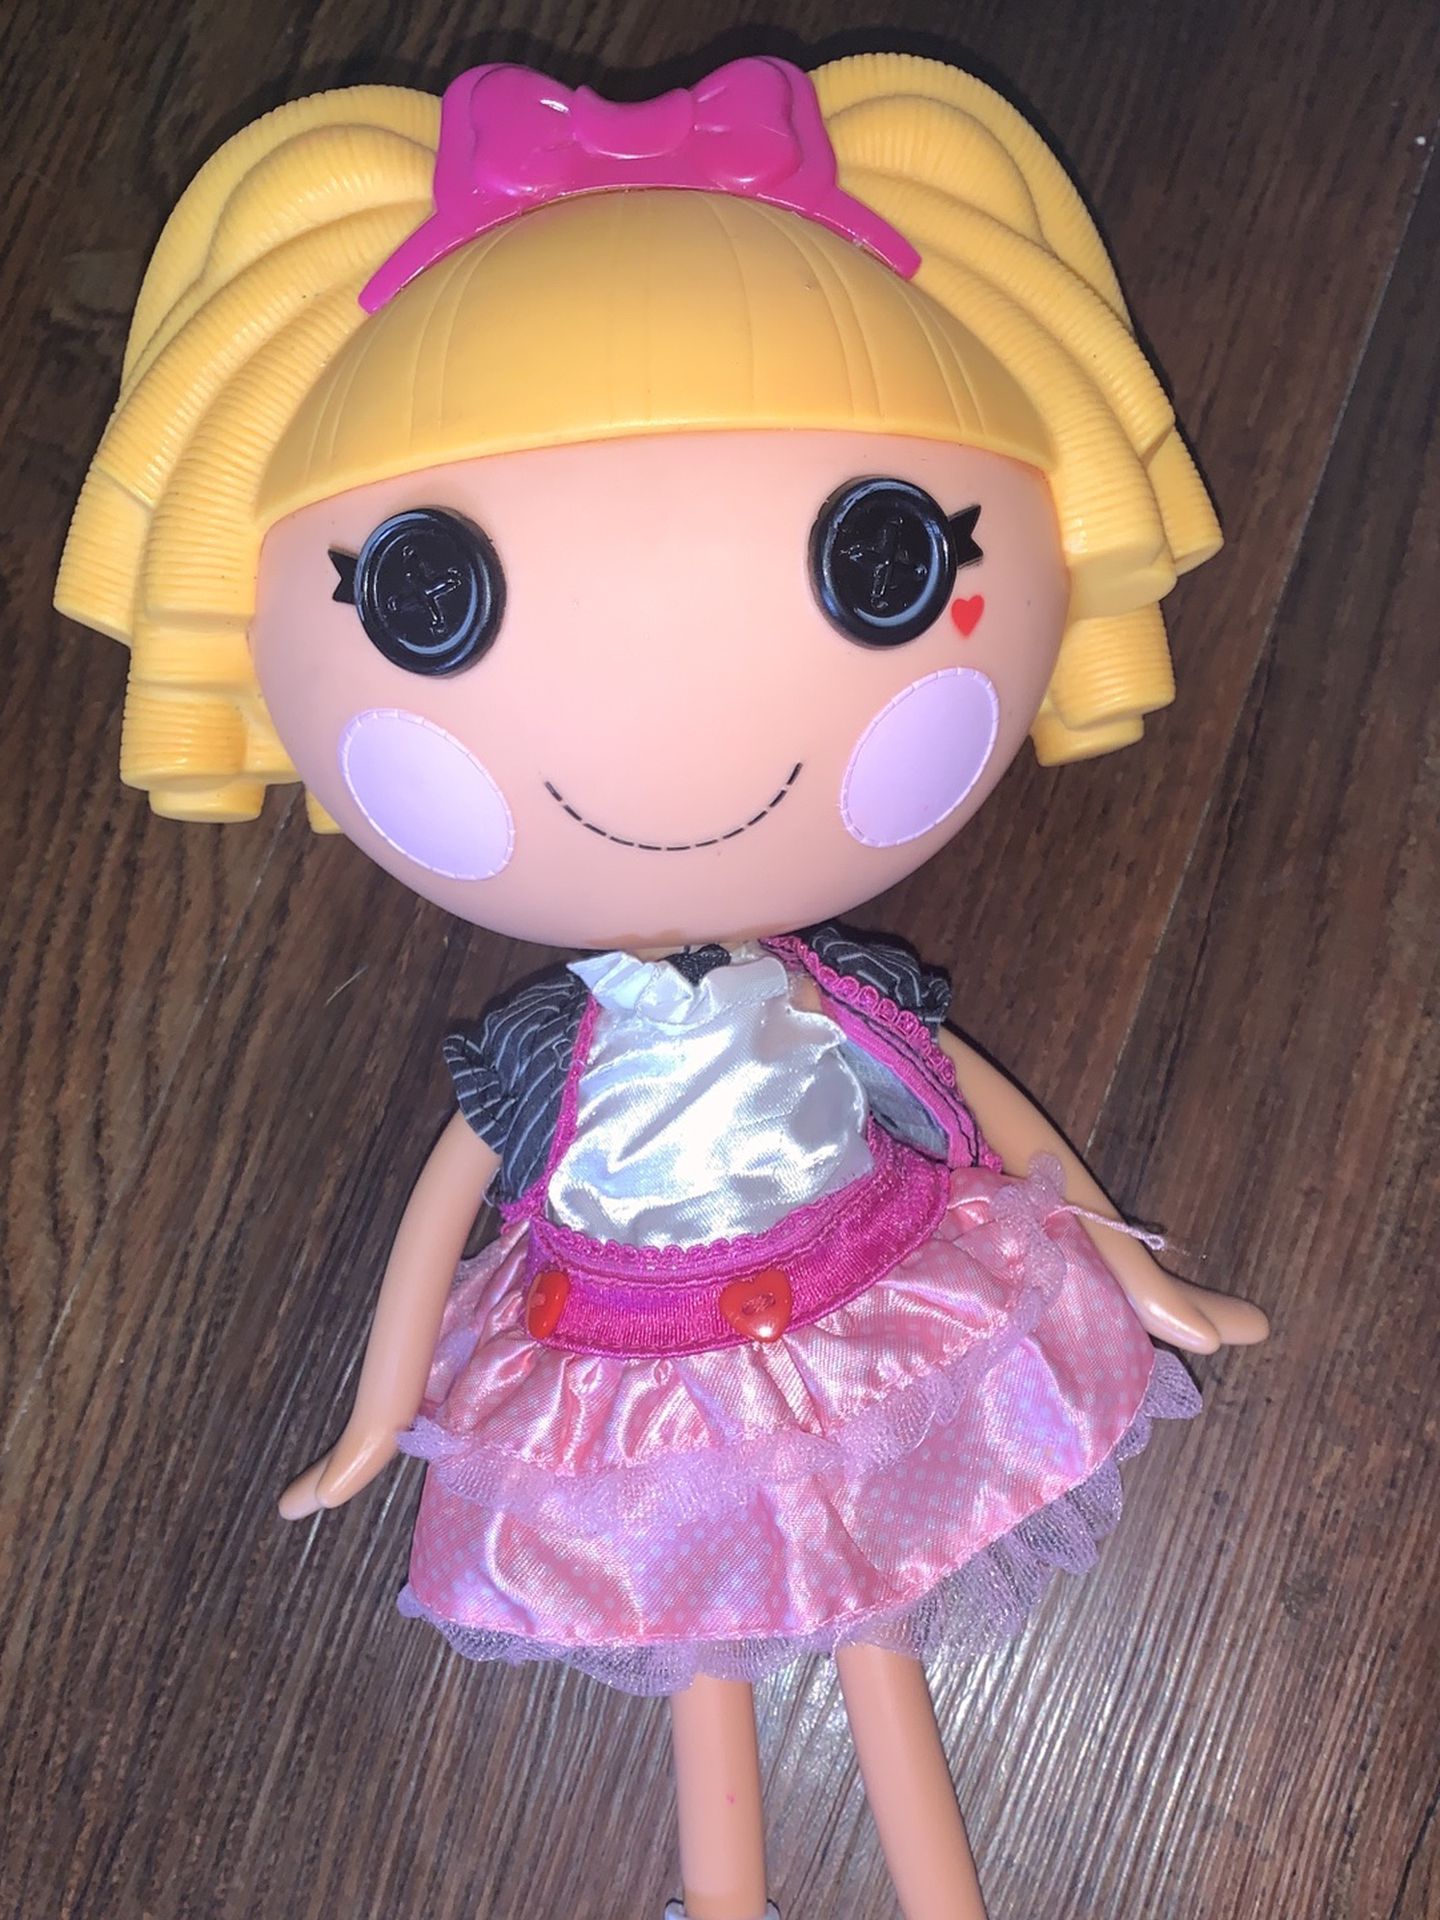 Lalaloopsy doll misty mysterious